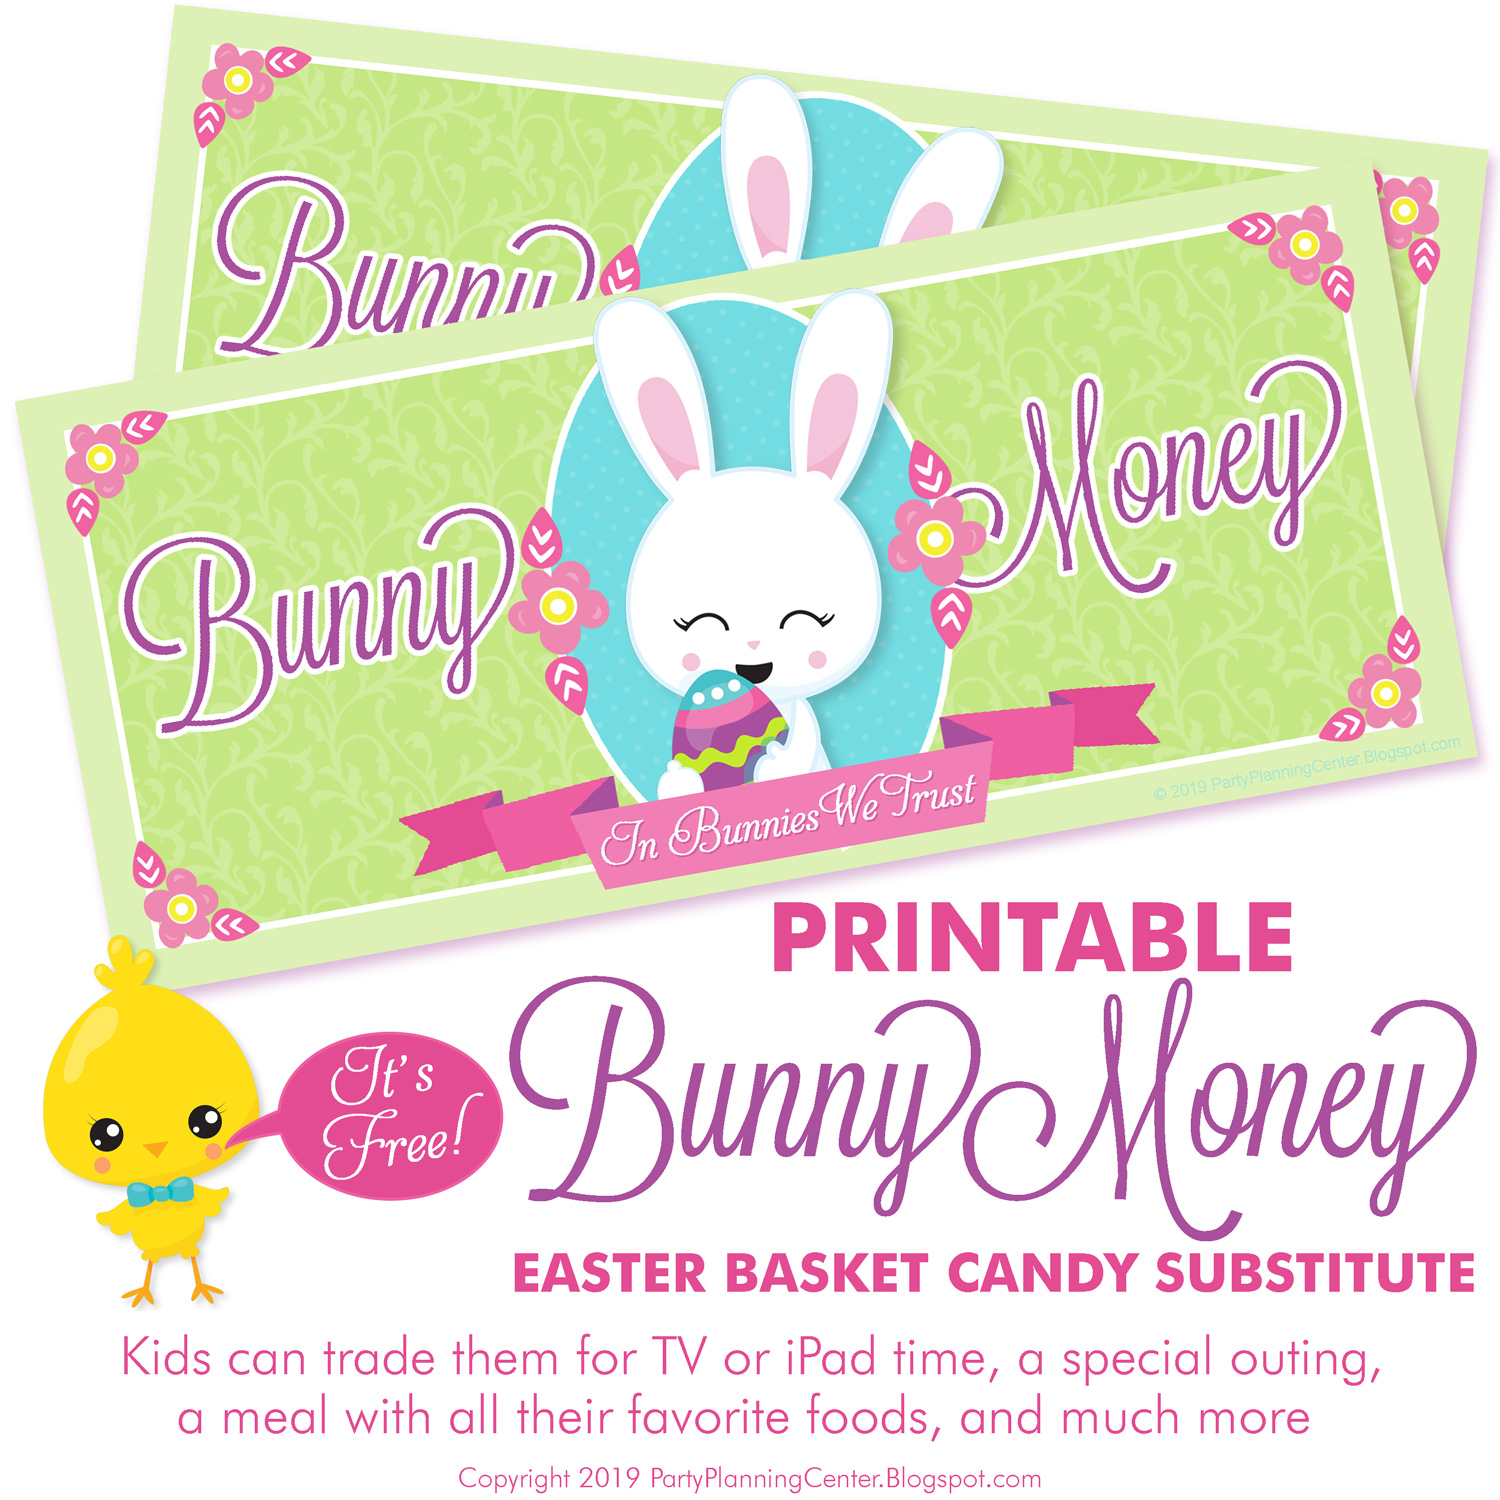 Creative Easter Basket Ideas FREE Bunny Money Party Planning